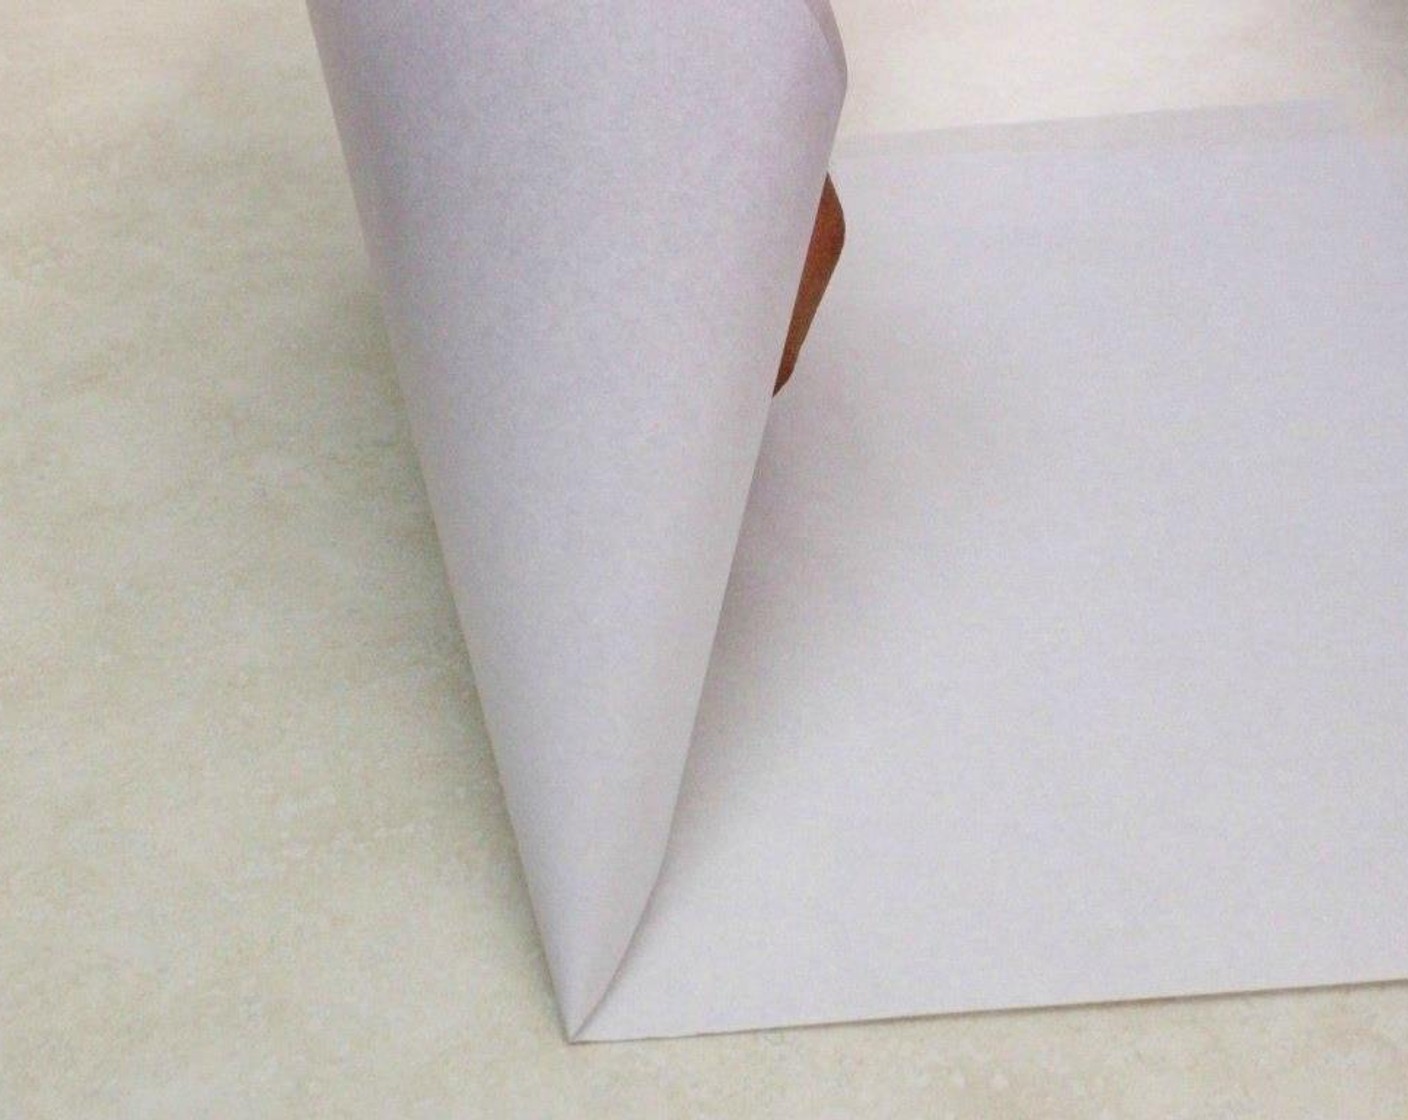 step 18 Make a pastry bag from parchment paper or regular printer paper, by taking the edges of the paper and bringing them together to form a thin point.